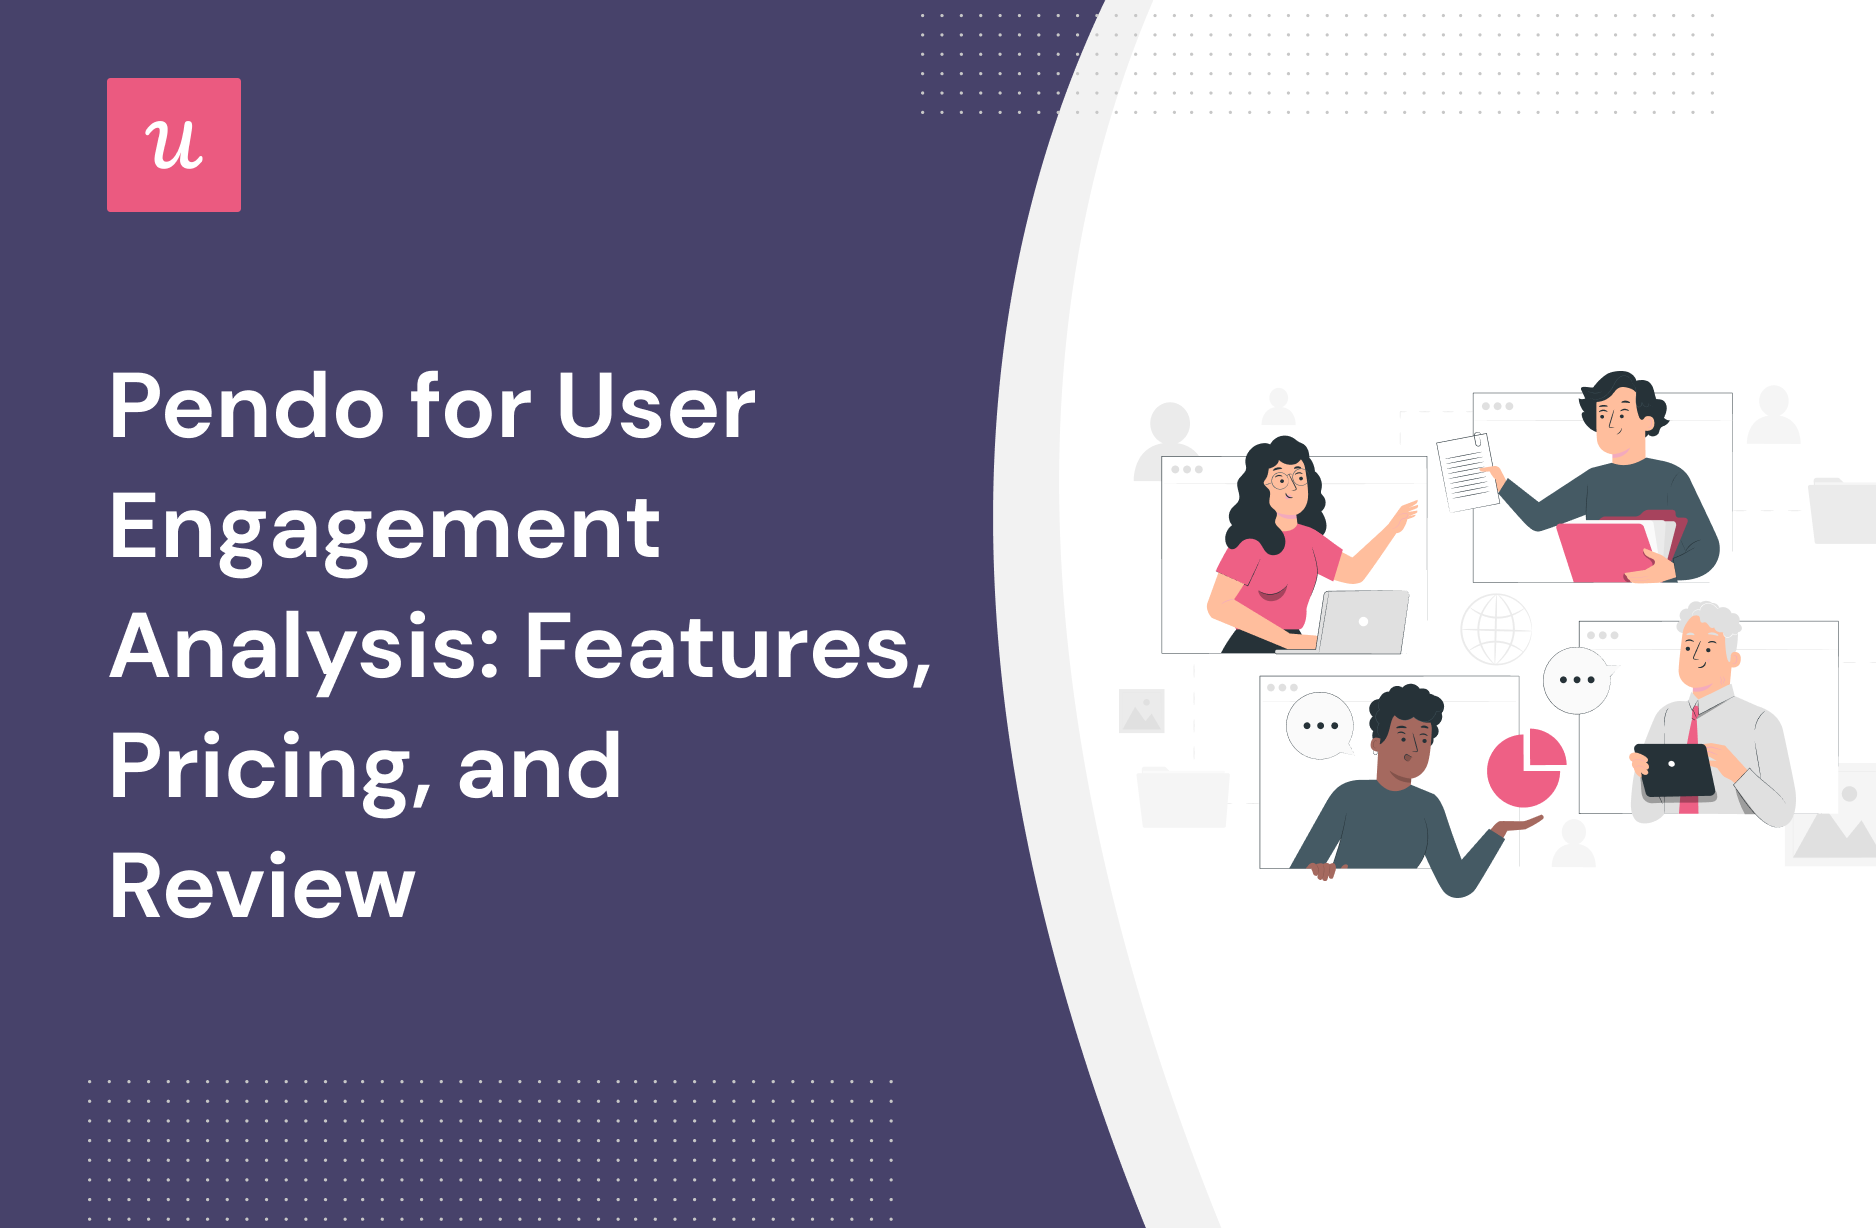 Pendo for User engagement analysis: Features, Pricing, and Review